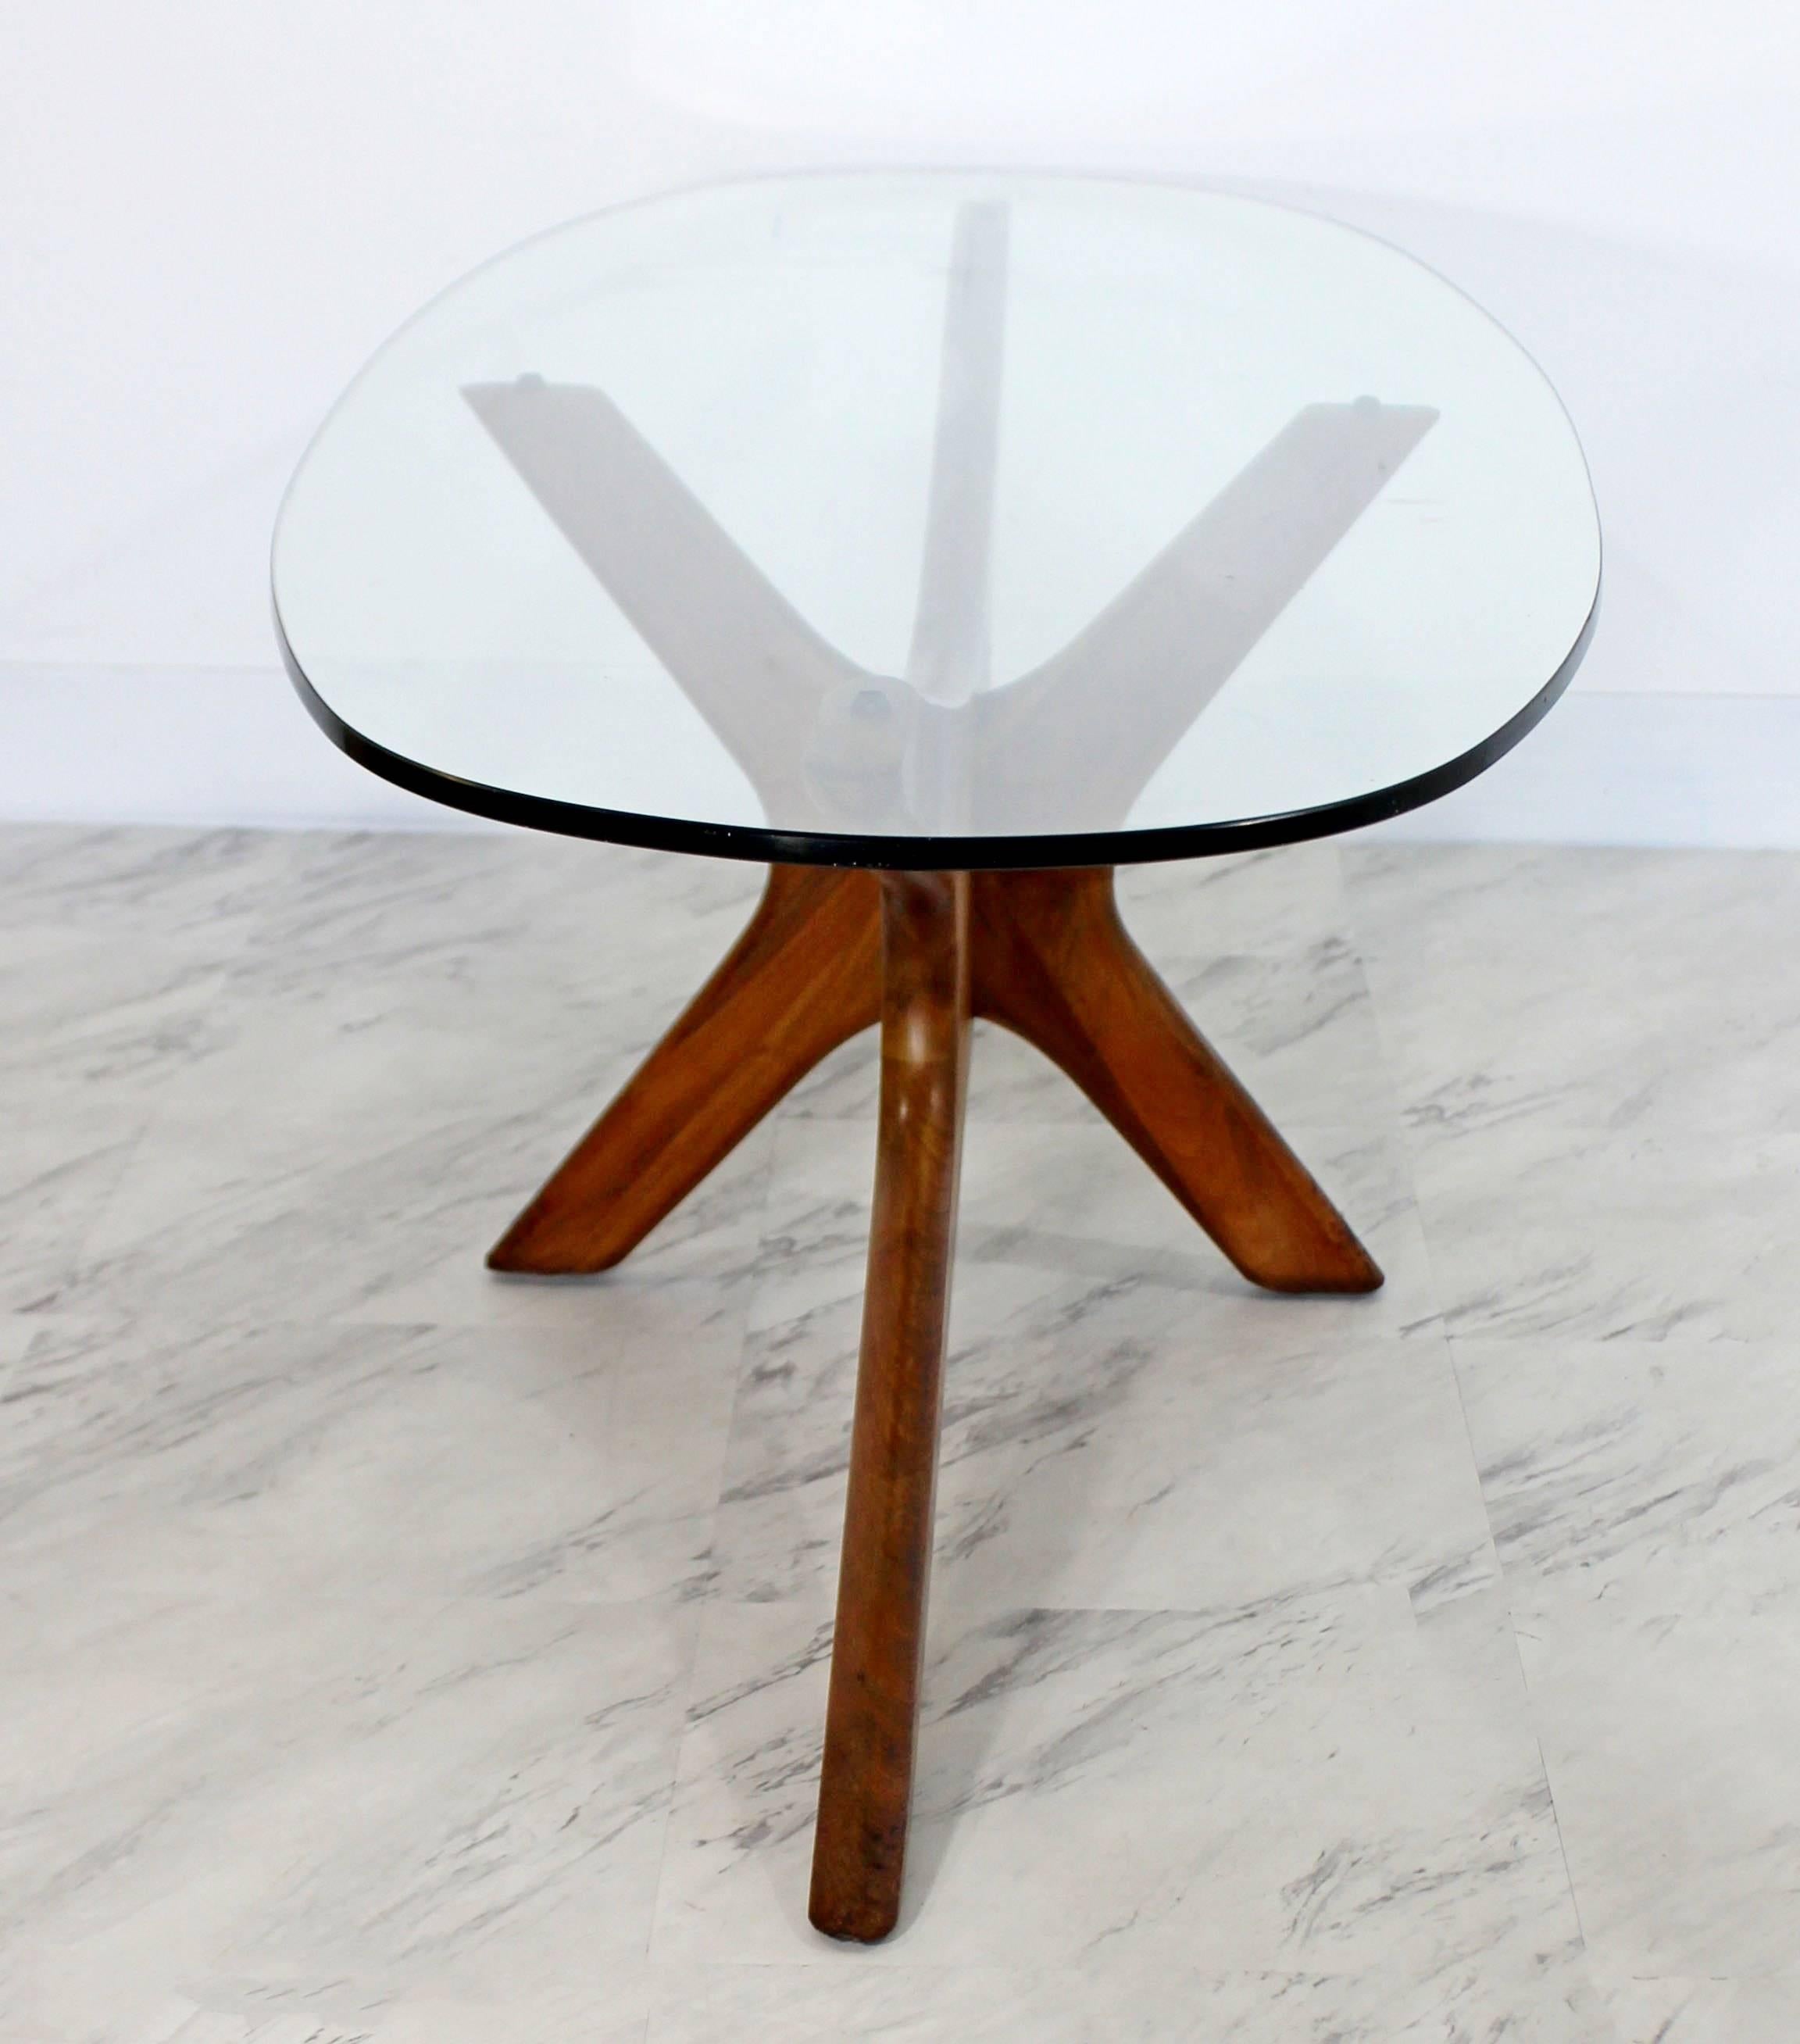 Mid-20th Century Mid-Century Modern Rare Adrian Pearsall Coffee Table, 1960s, Glass and Walnut